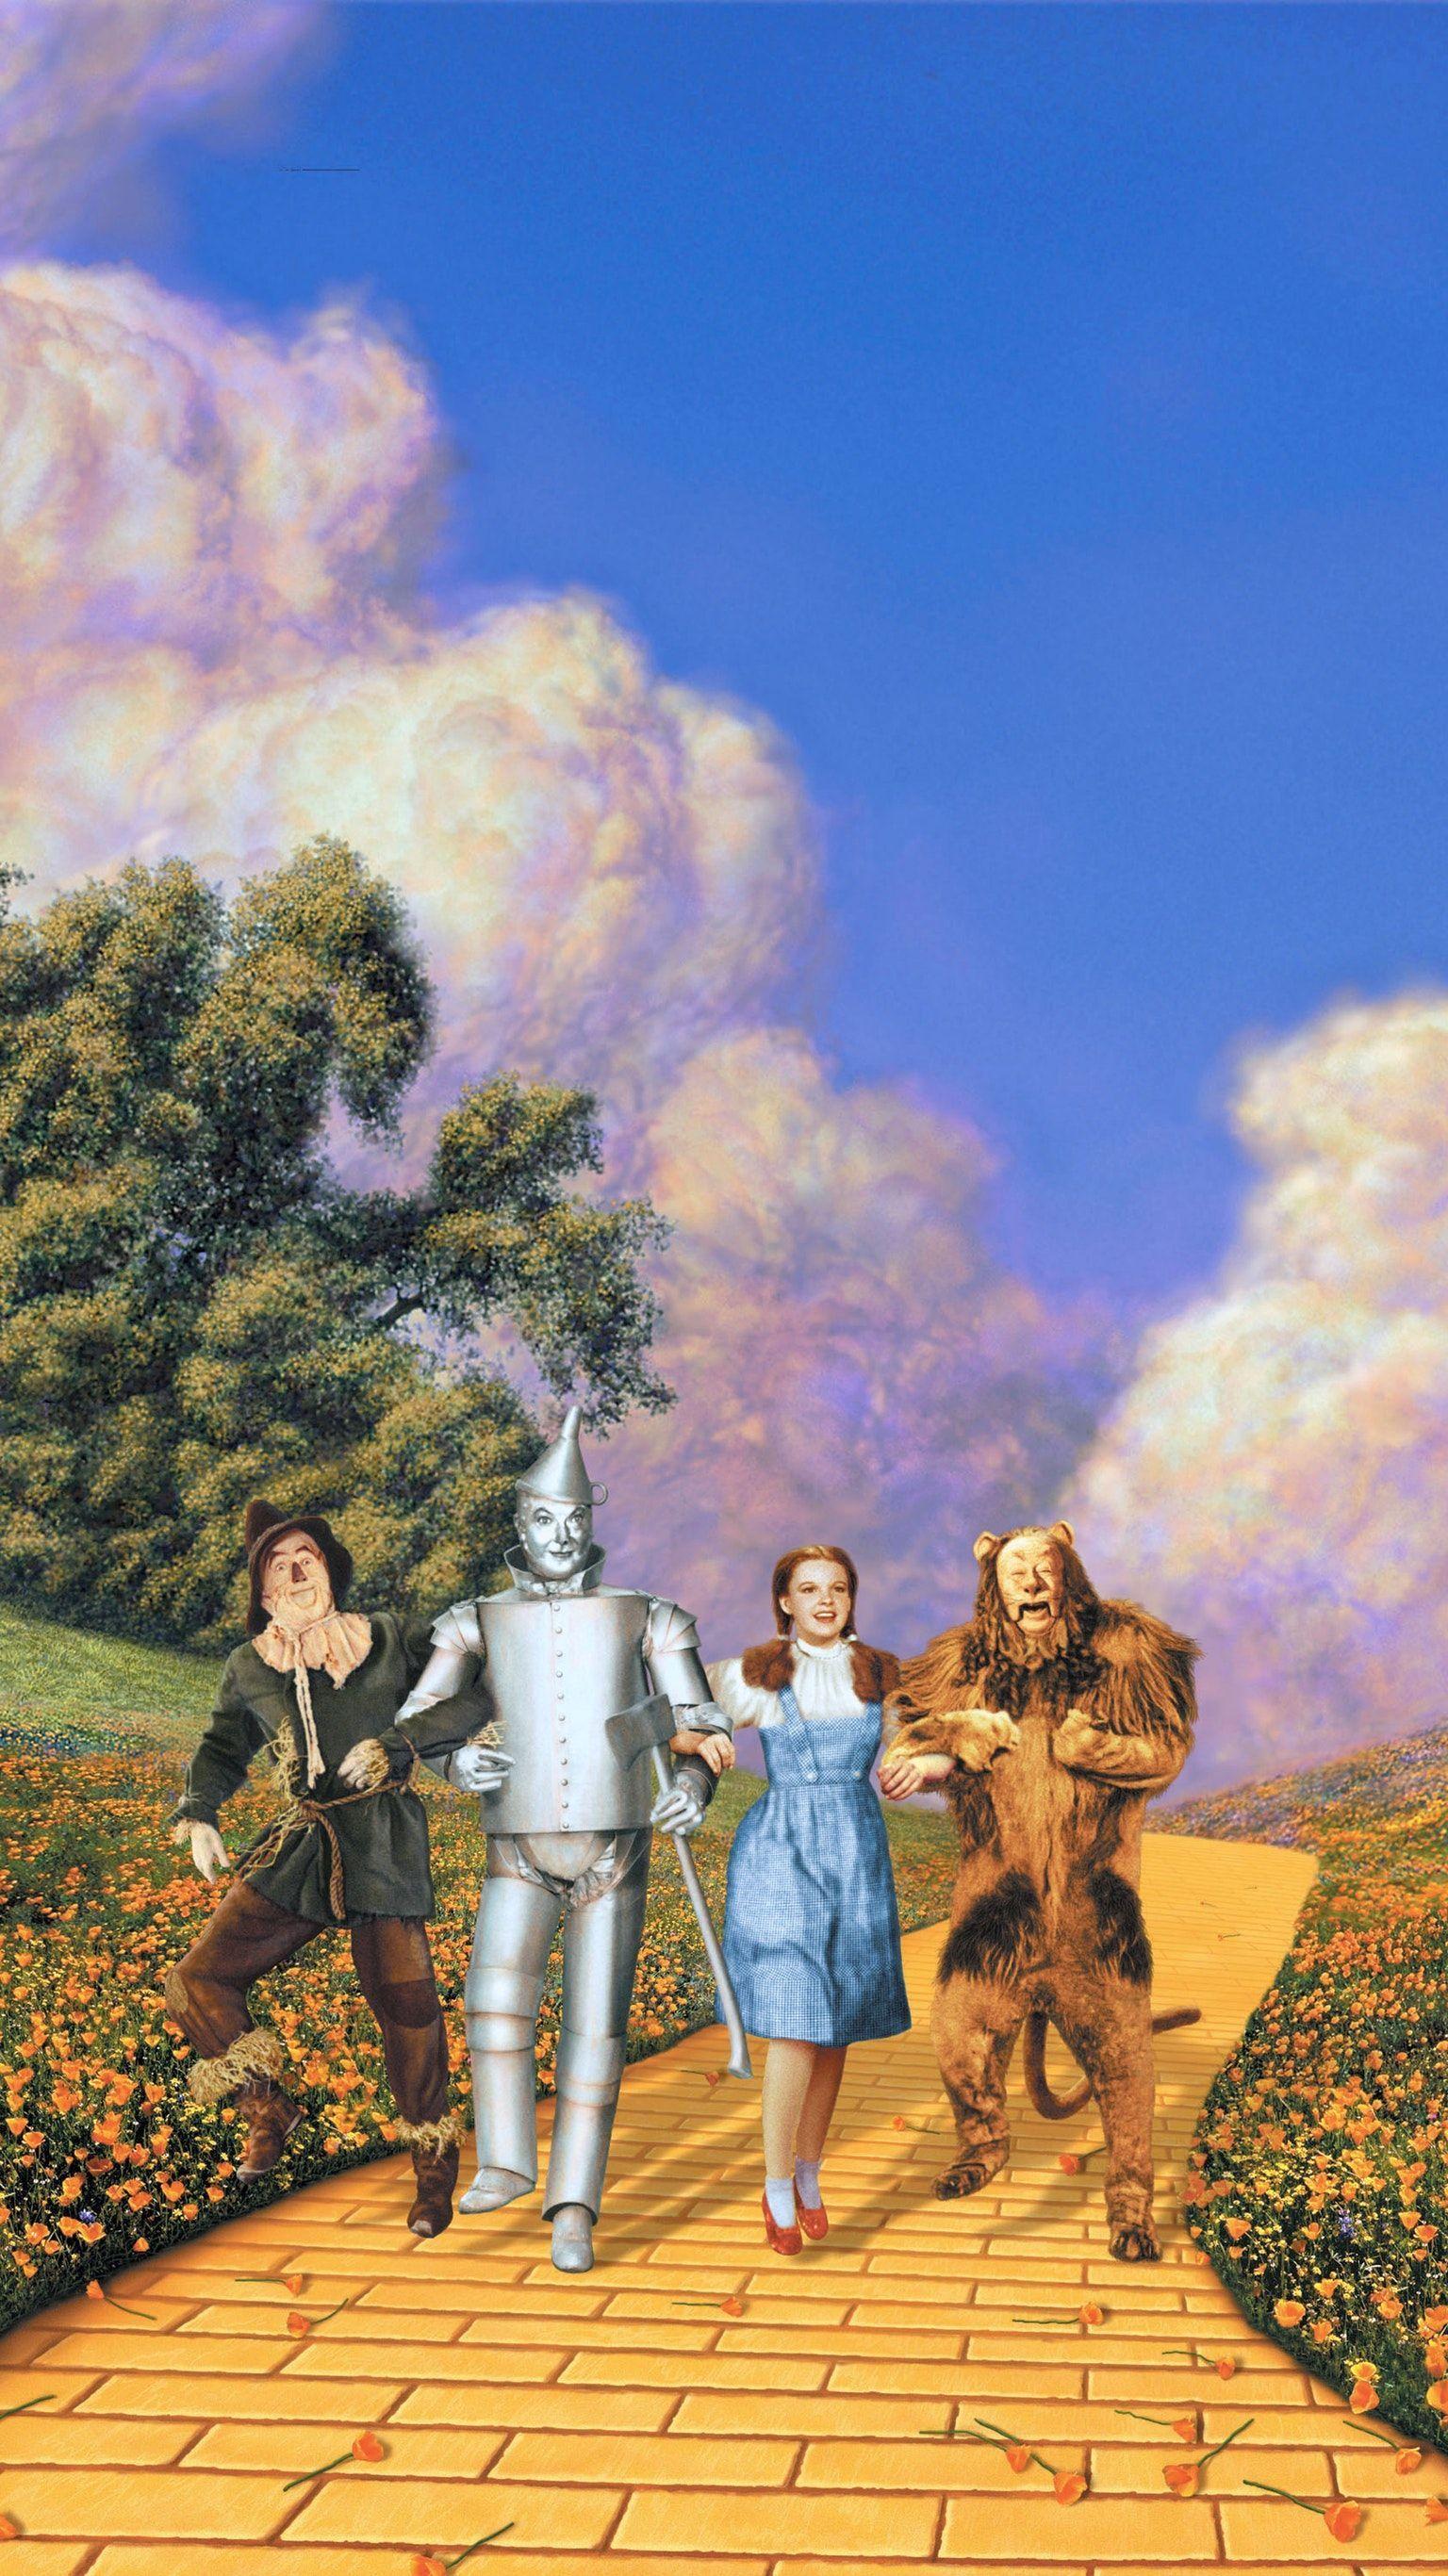 Wizard of Oz Wallpapers - Top Free